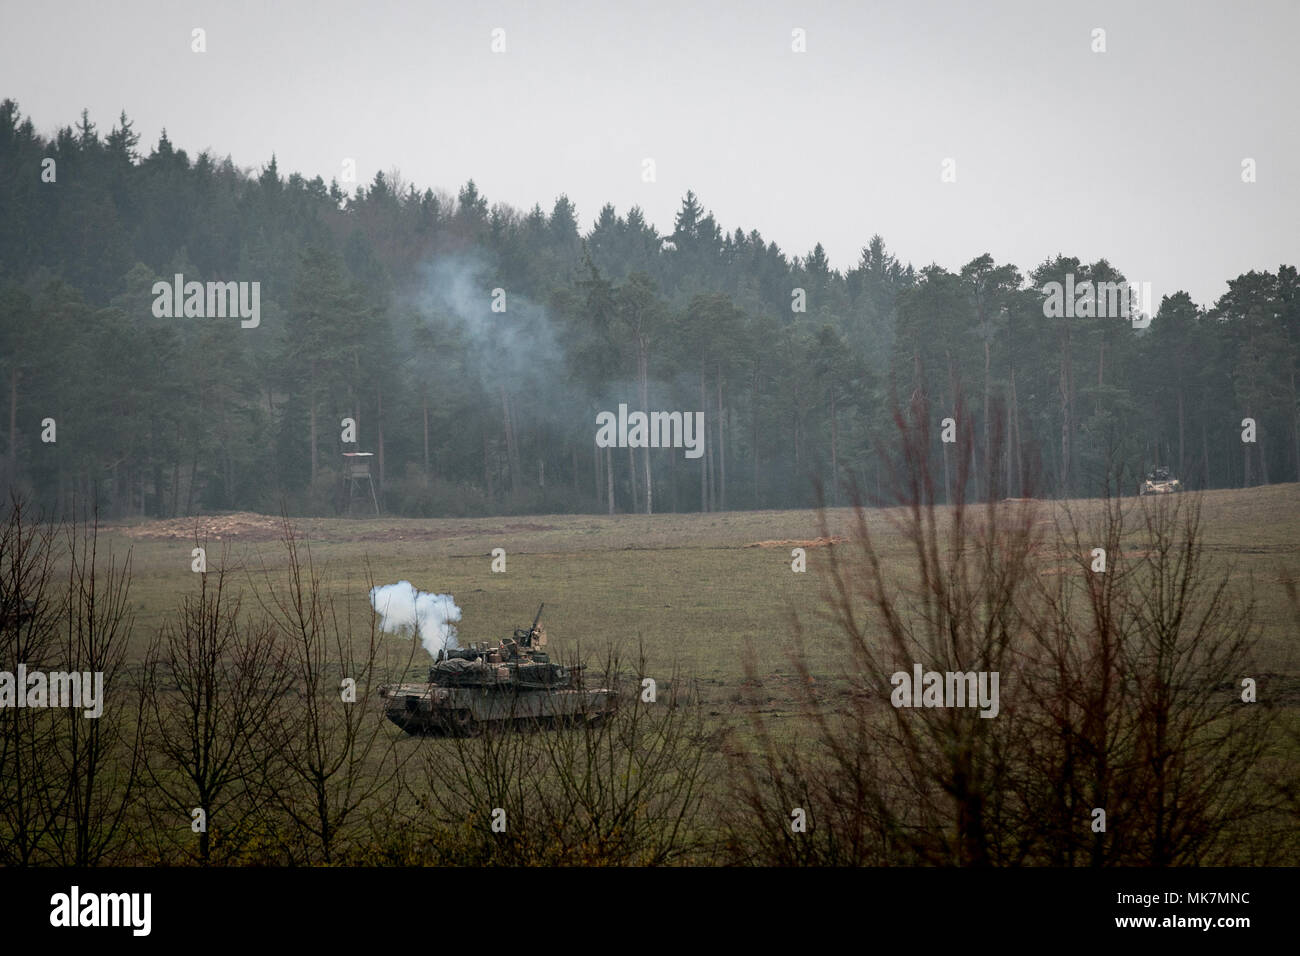 Two M-1 Abrams tanks fire simulated rounds at one another during a Allied Spirit VII training exercise firefight in Grafenwoehr, Germany Nov. 17, 2017. Approximately 3,700 service members from 13 nations gathered in 7th Army Training Command’s Hohenfels Training Area in southeastern Germany to participate in the seventh iteration of Allied Spirit, which is scheduled for Oct. 30 - Nov. 22, 2017. (U.S. Army photo by Spc. Dustin D. Biven / 22nd Mobile Public Affairs Detachment) Stock Photo